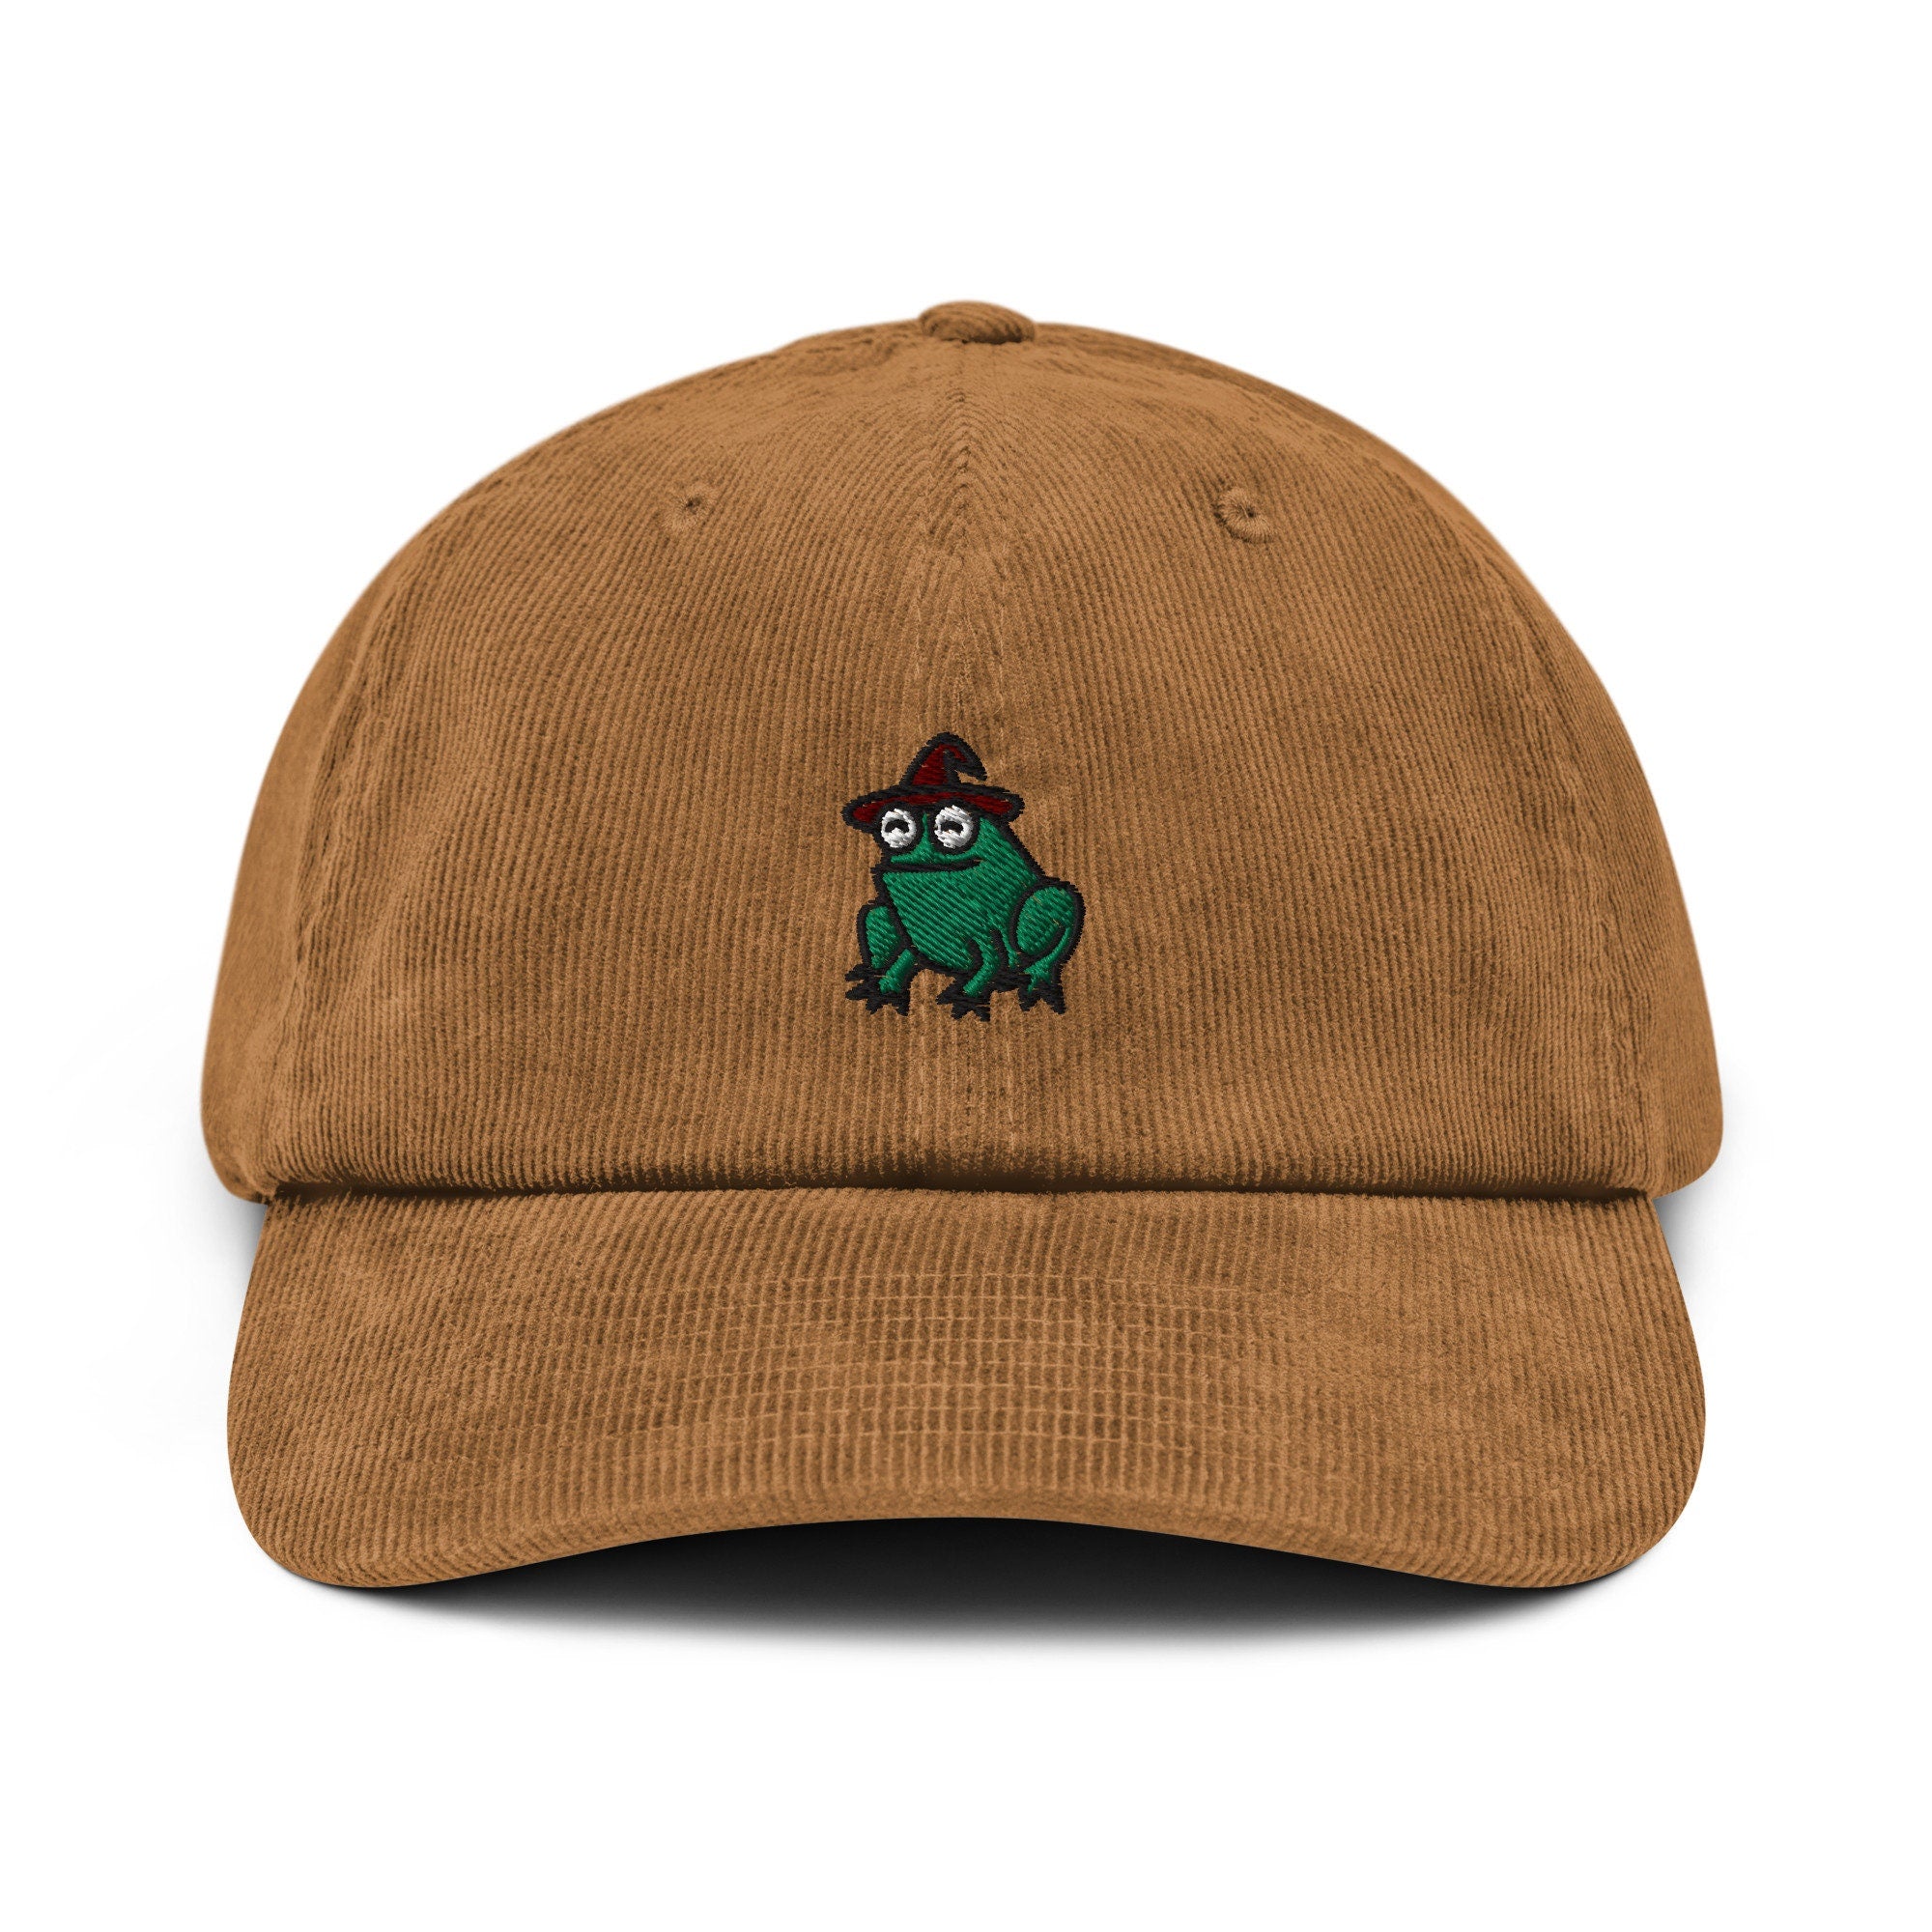 Wizard Frog Corduroy Hat, Handmade Embroidered Corduroy Dad Cap - Multiple Colors